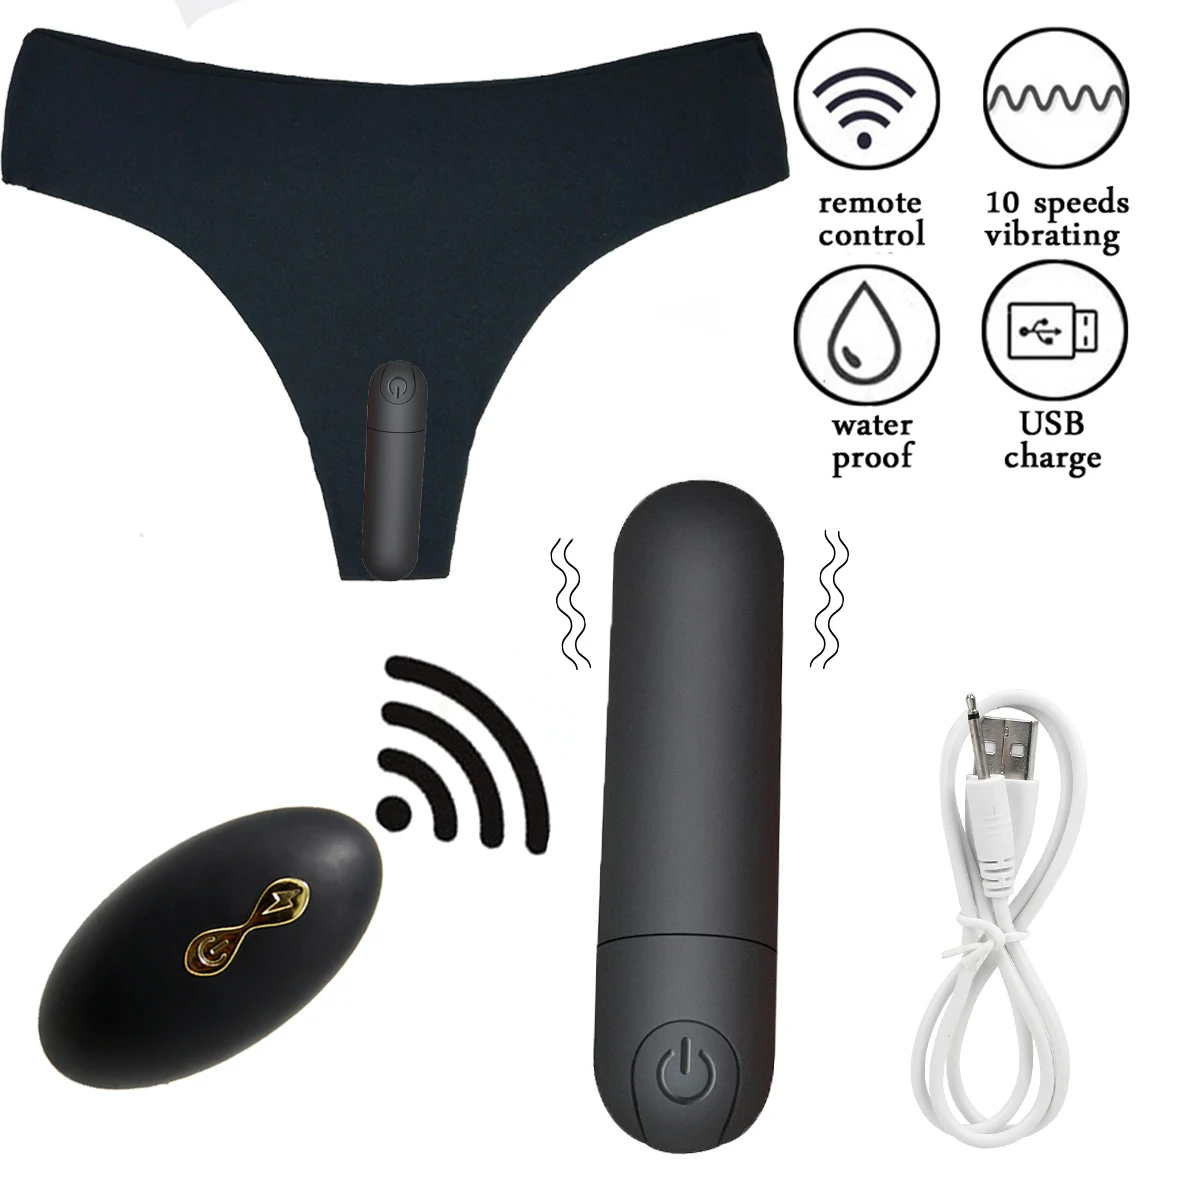 Hot sale Remote Control Rechargeable Bullet Vibrator Sex Toys For Women Out Door Underwear